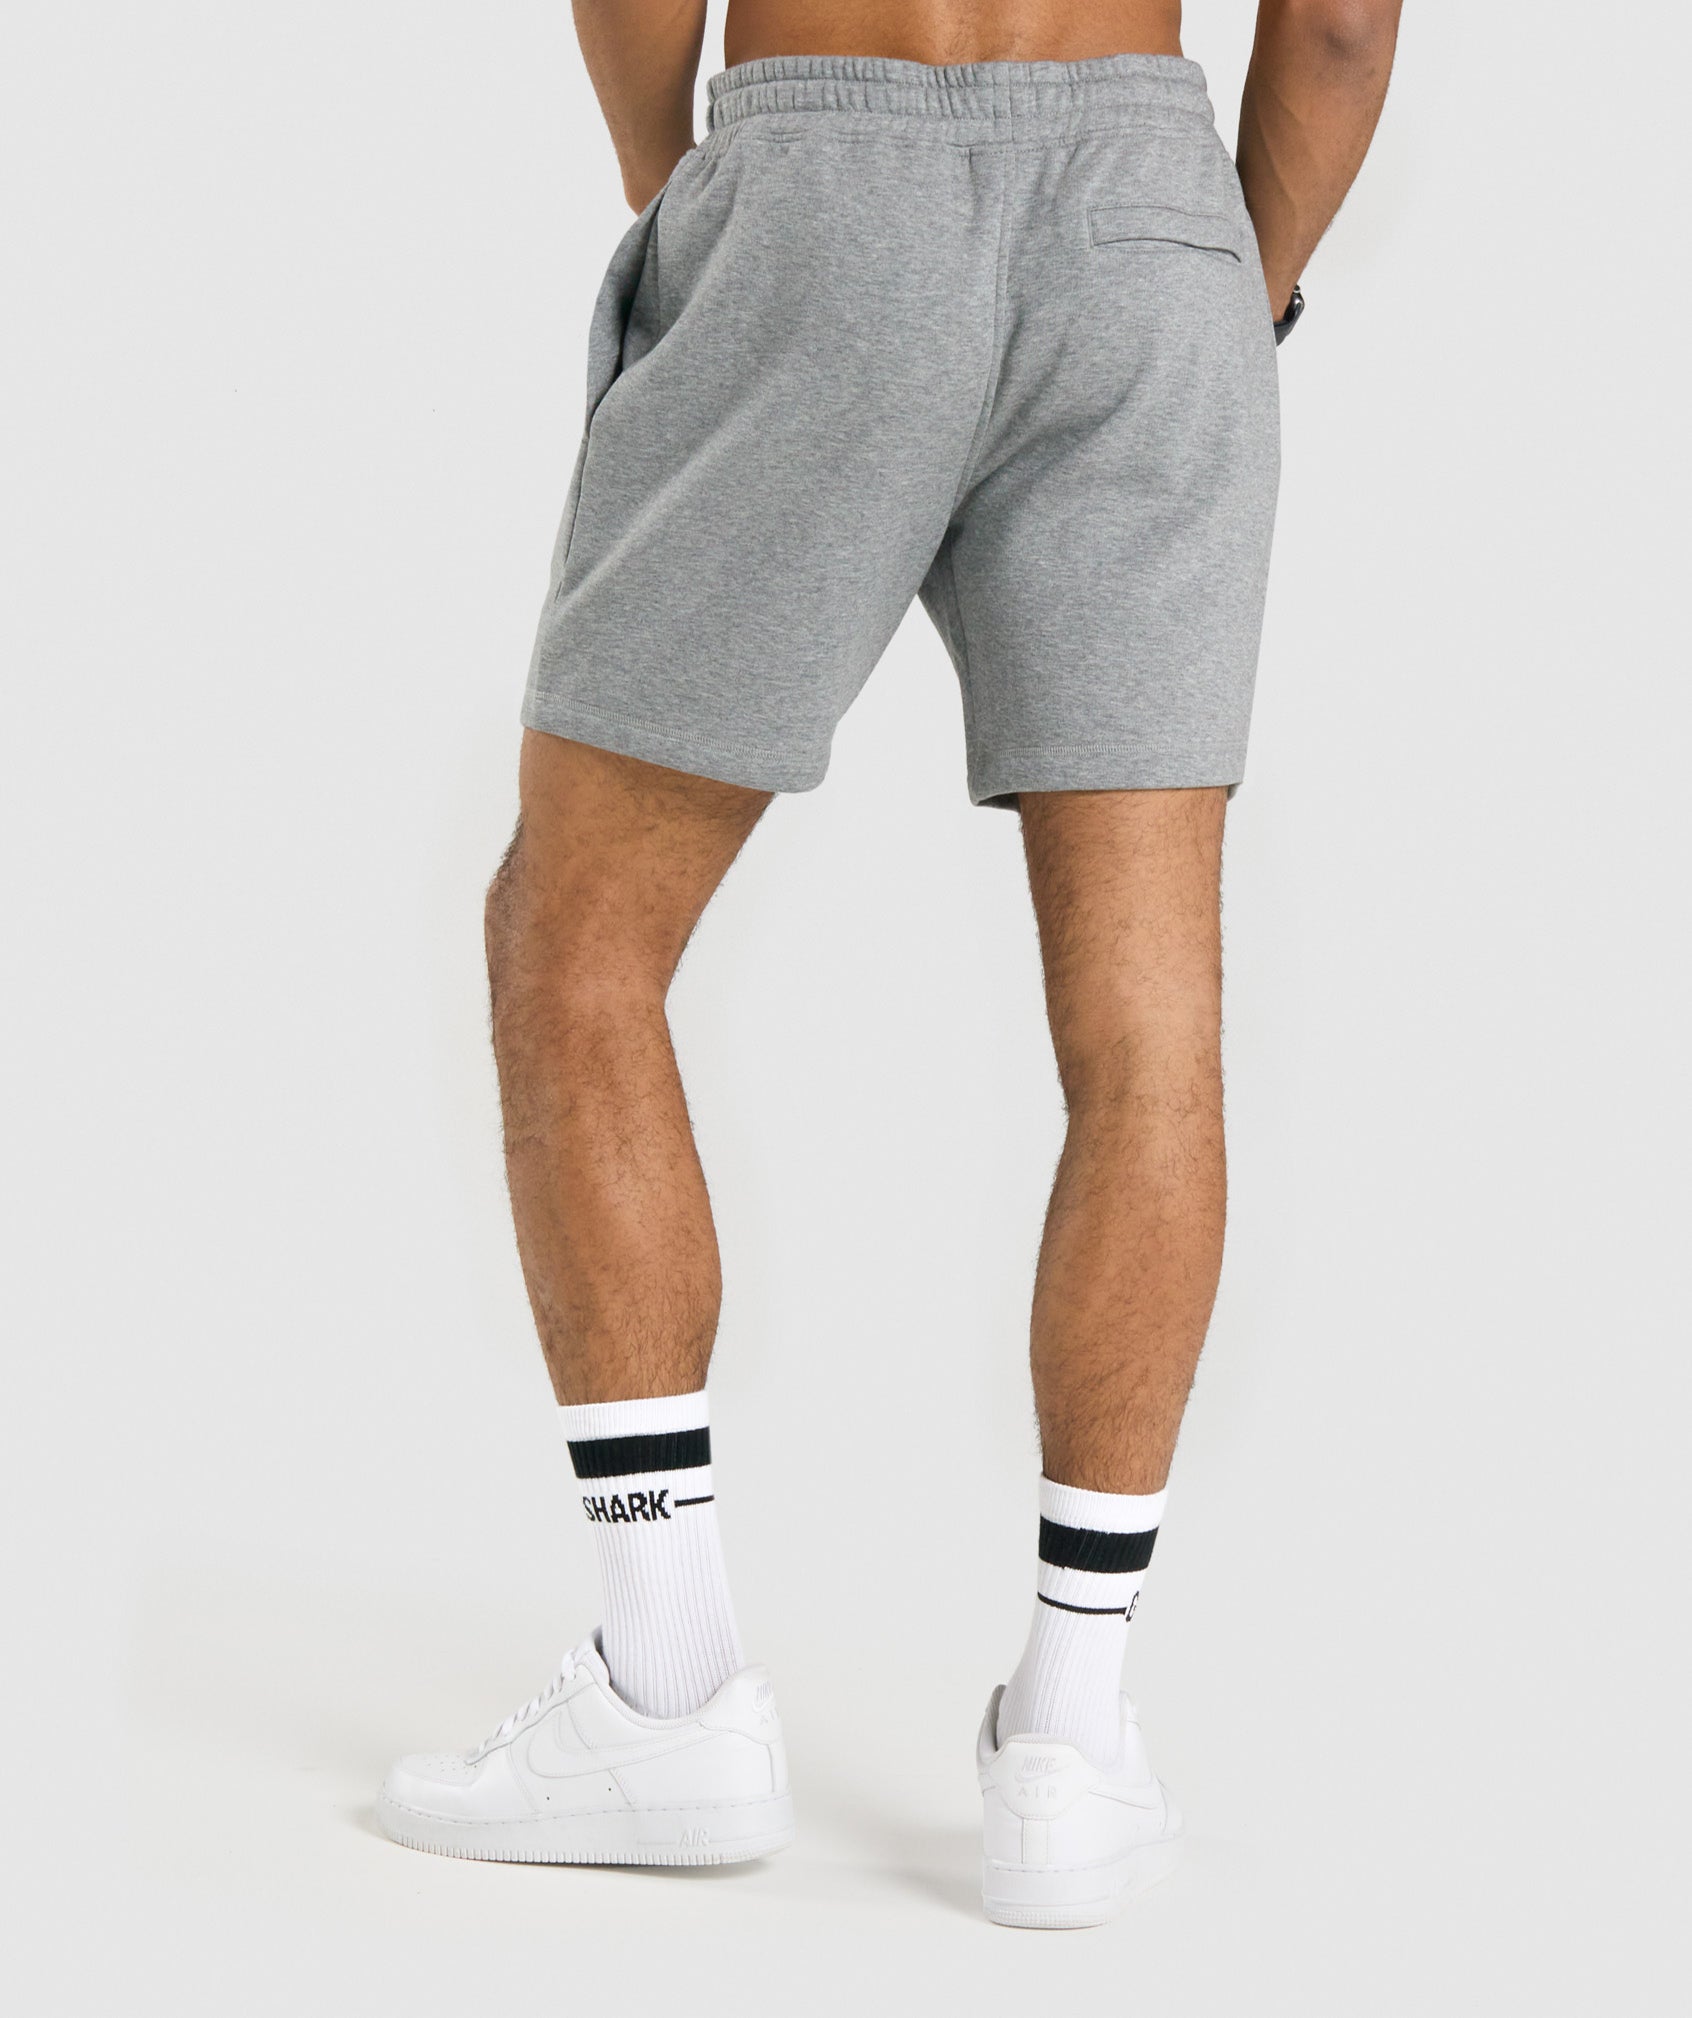 Crest Shorts in Charcoal Marl - view 2